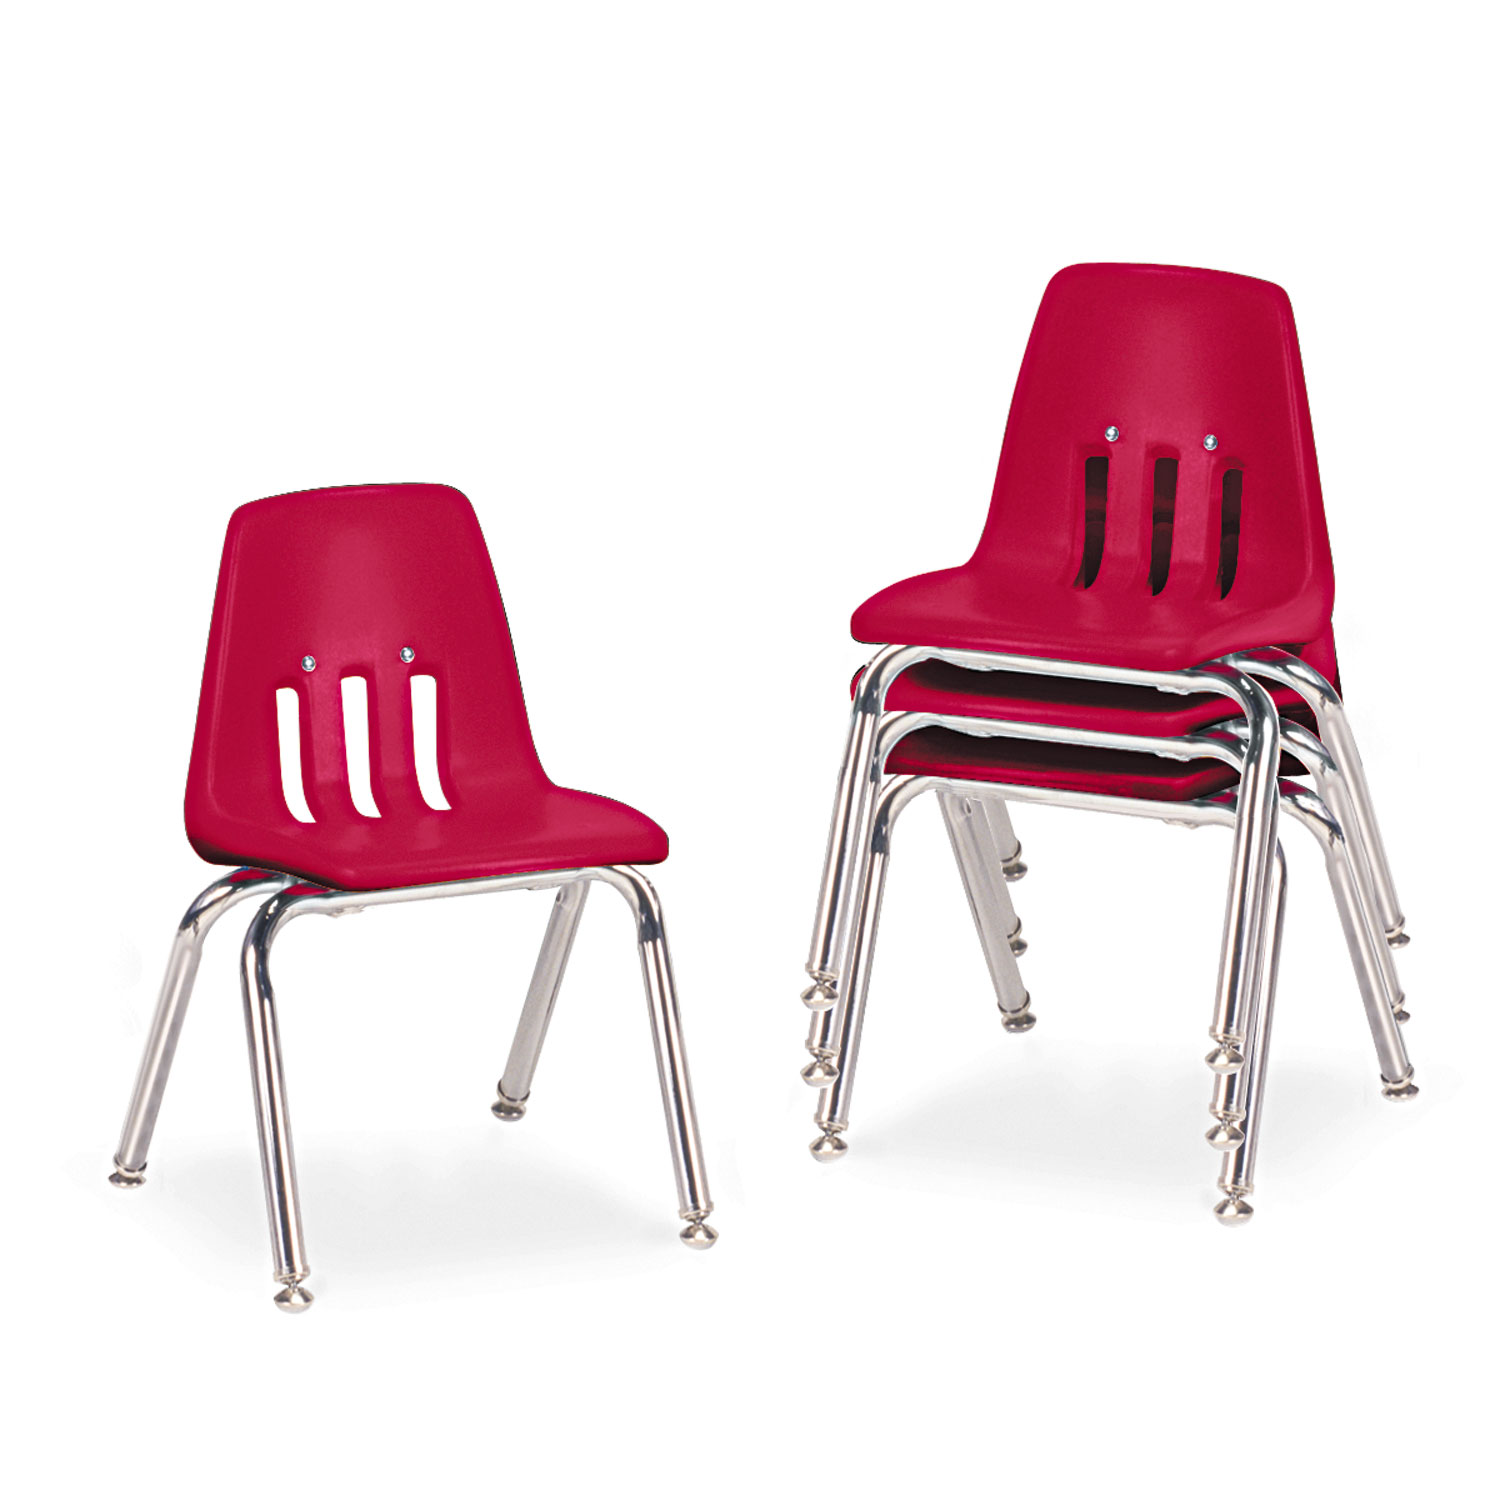 9000 Series Classroom Chairs, 14 Seat Height, Red/Chrome, 4/Carton